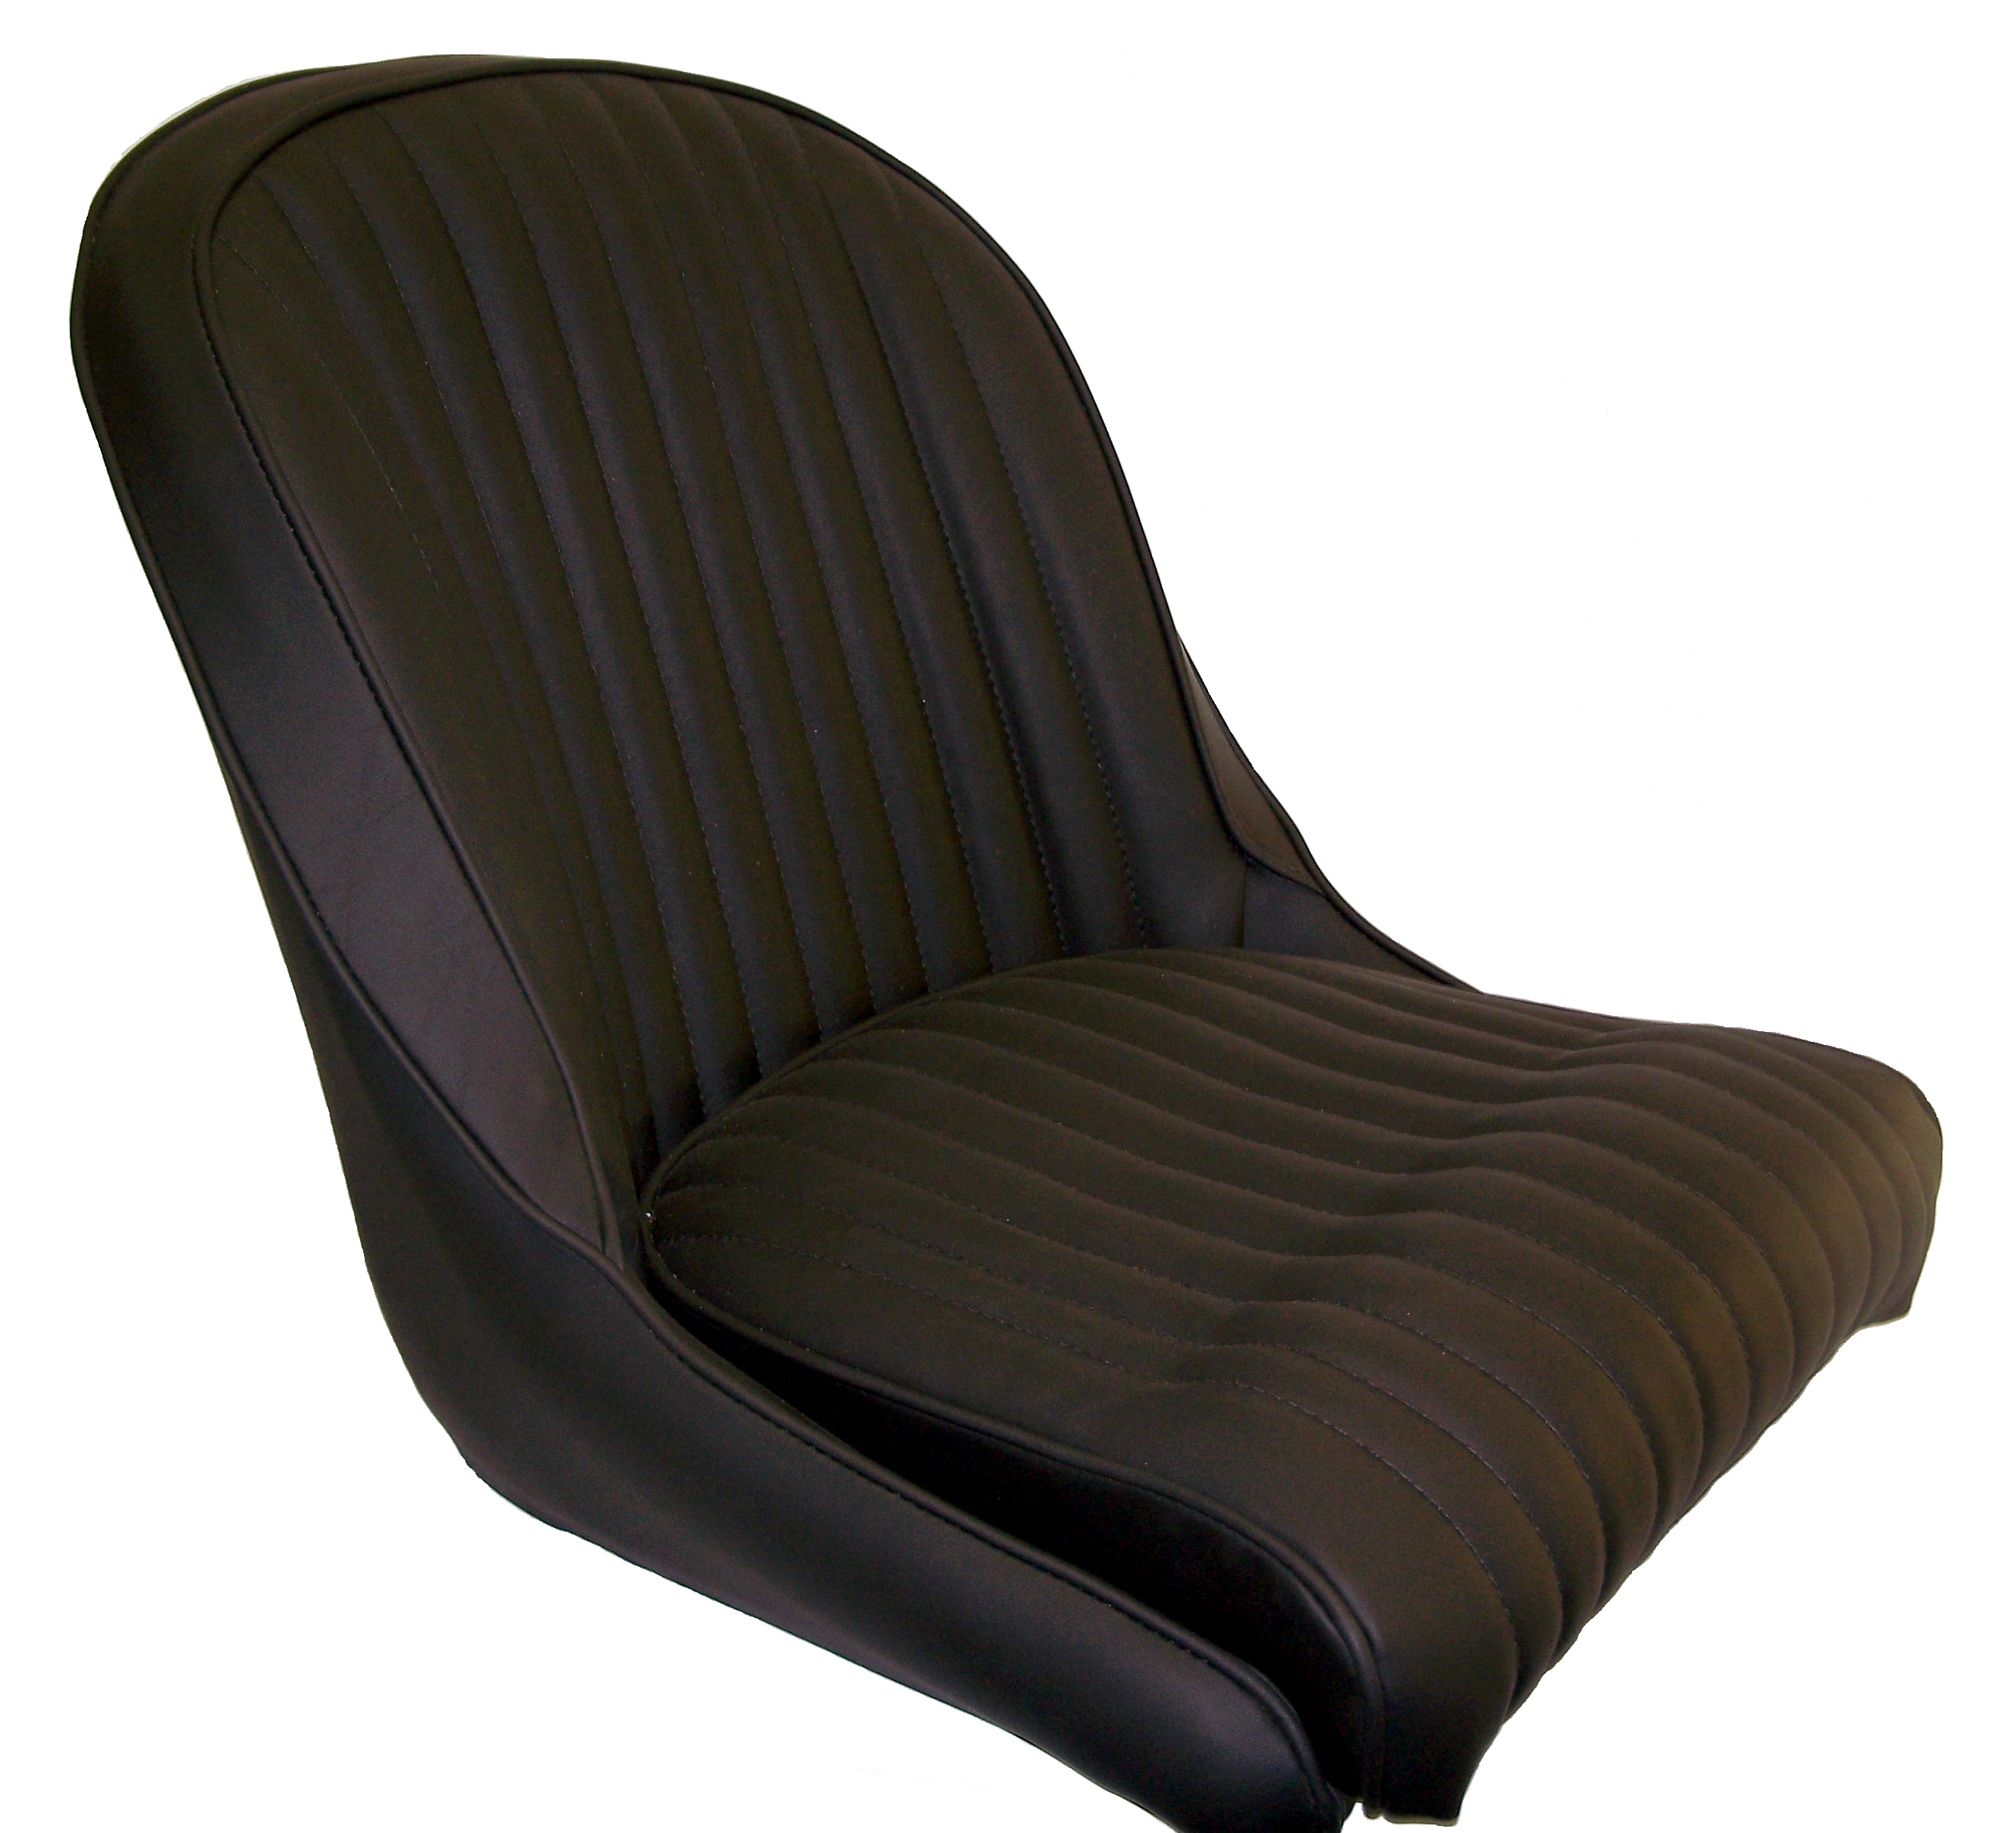 seat upholstered vinyl sold as pair only